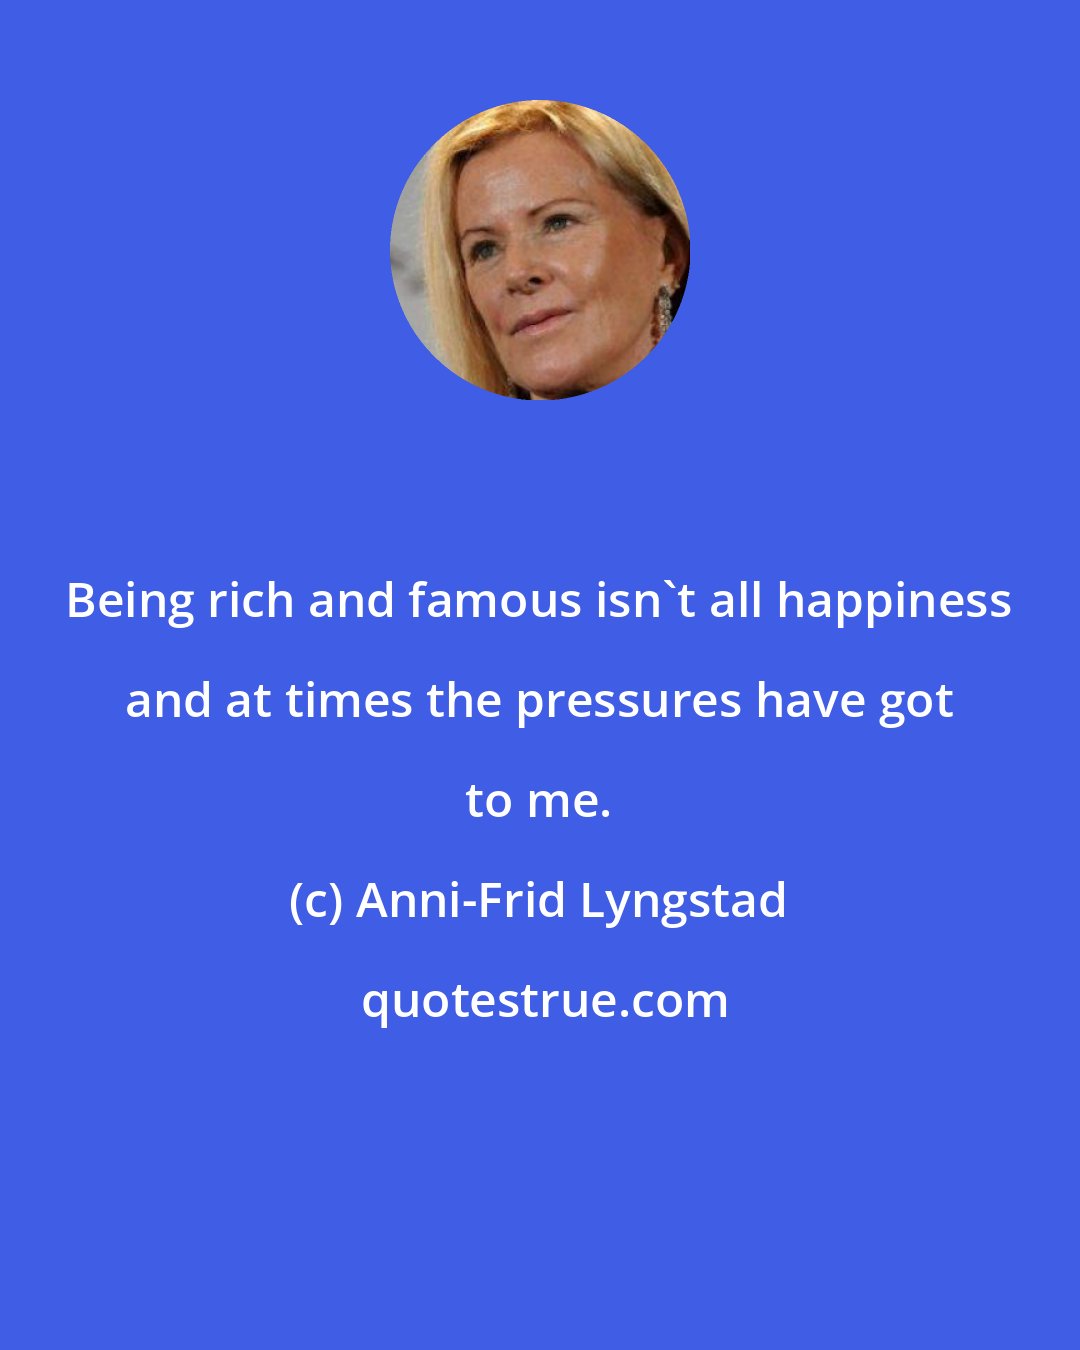 Anni-Frid Lyngstad: Being rich and famous isn't all happiness and at times the pressures have got to me.